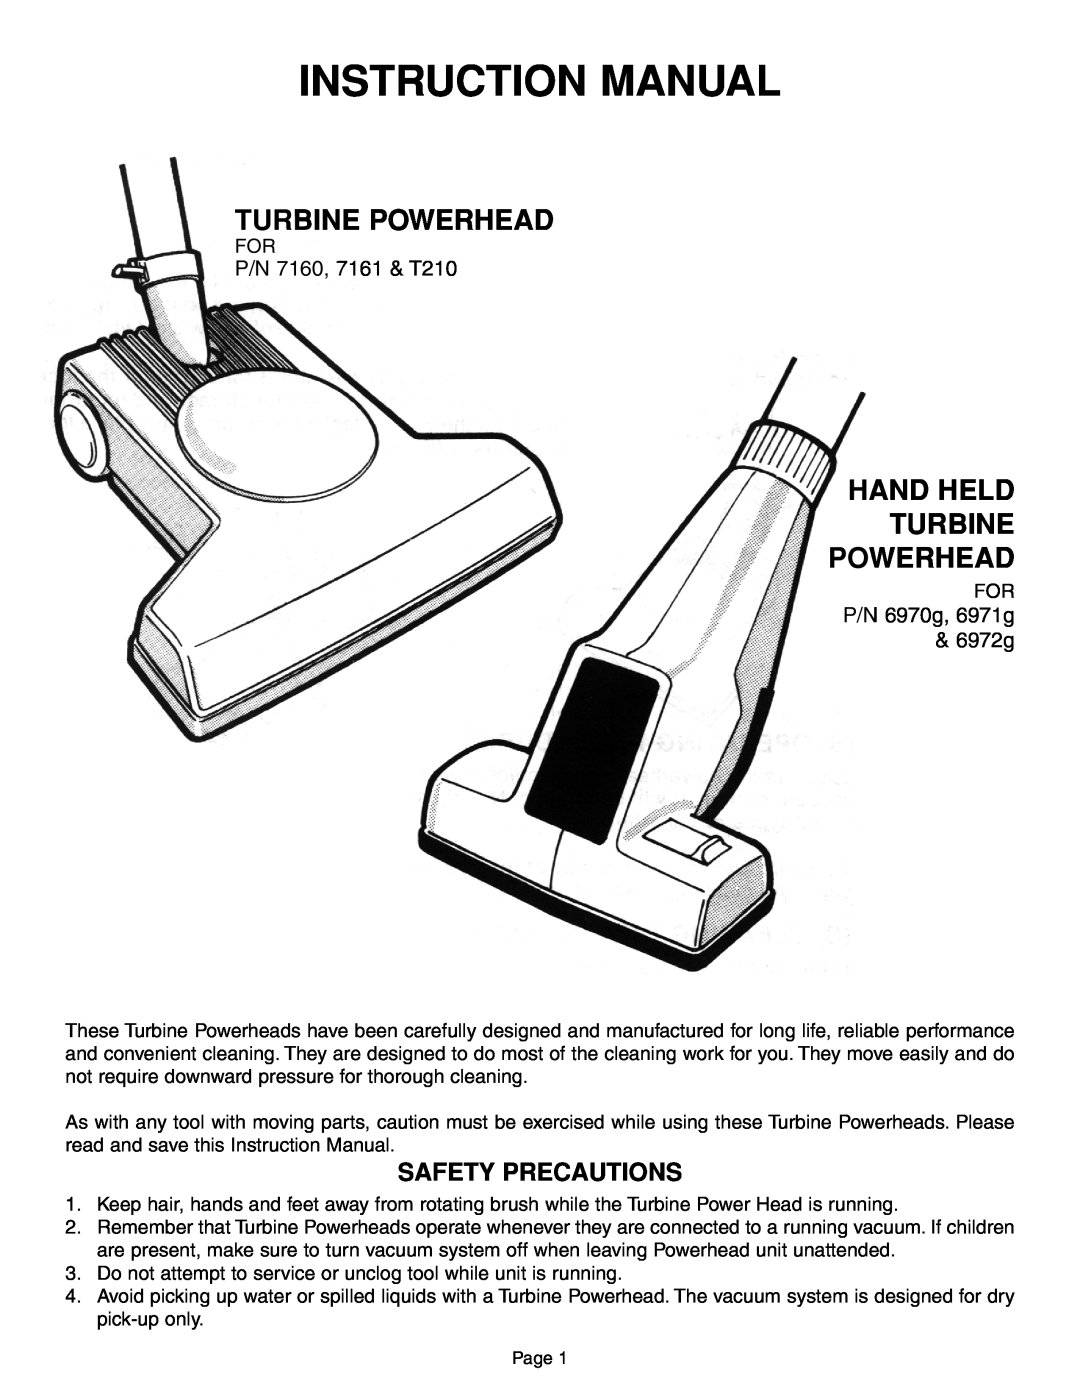 H-P Products instruction manual Safety Precautions, Hand Held Turbine Powerhead, P/N 7160, 7161 & T210 